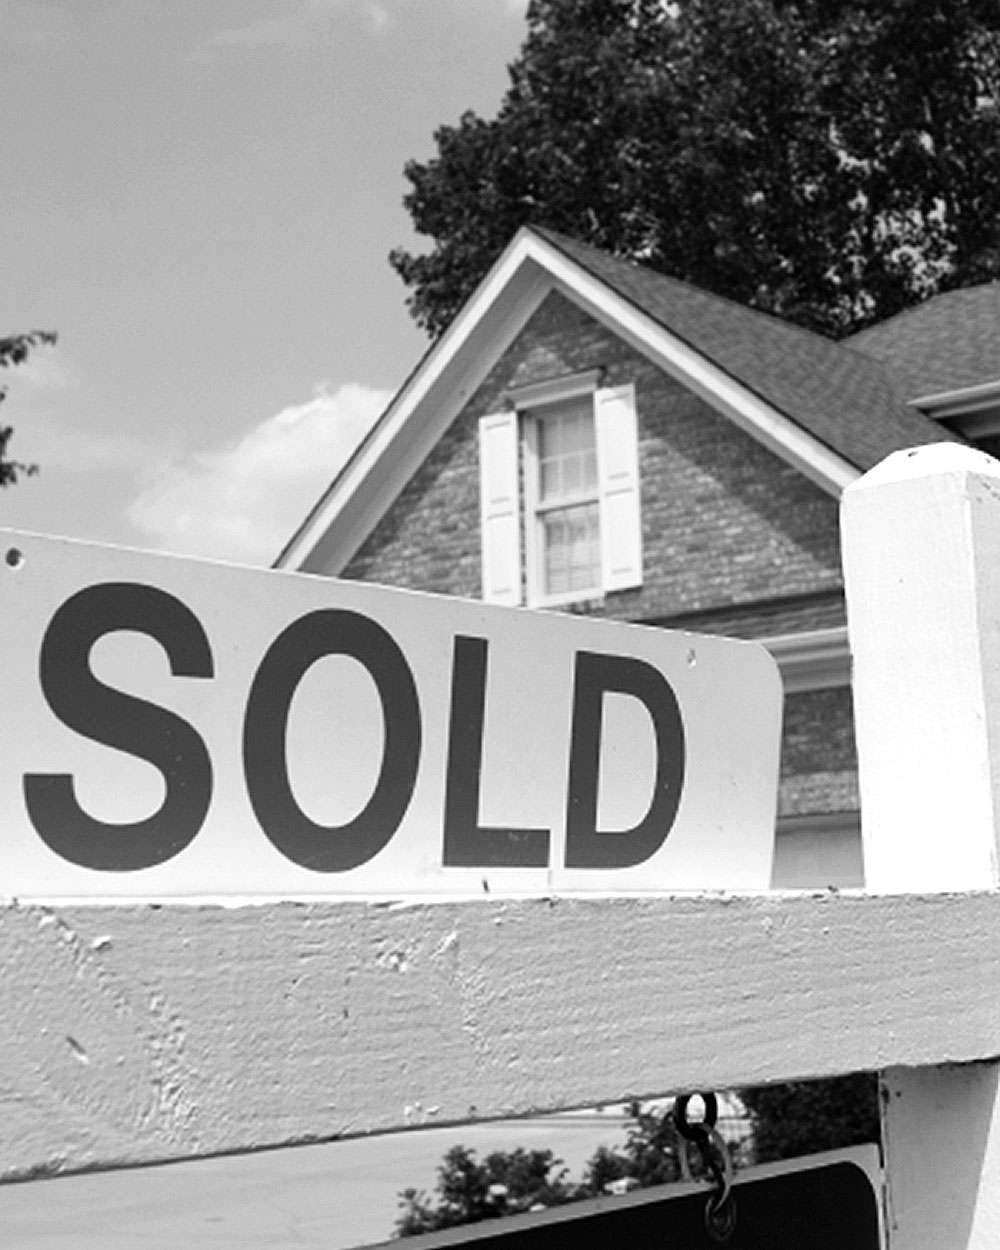 house-sold-sign-0216.jpg